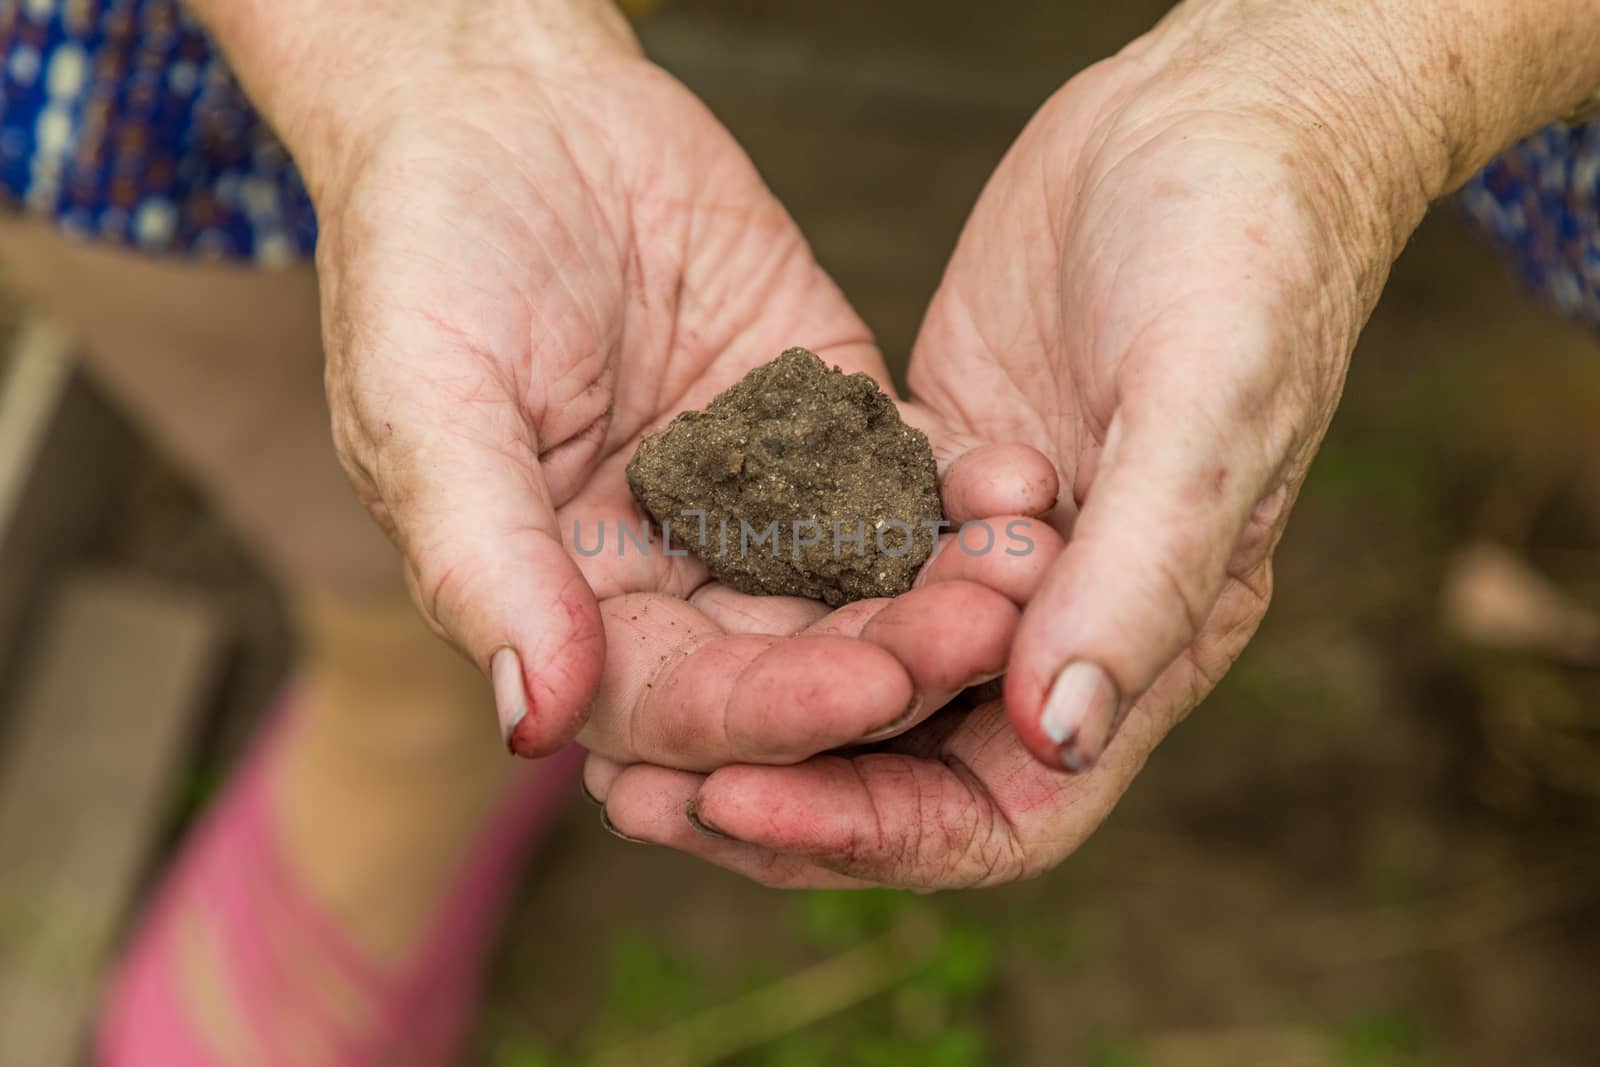 The wrinkled hands of an elderly woman hold a lump of earth. Environmental, careful.. The concept of agriculture, farming, kinship with nature.